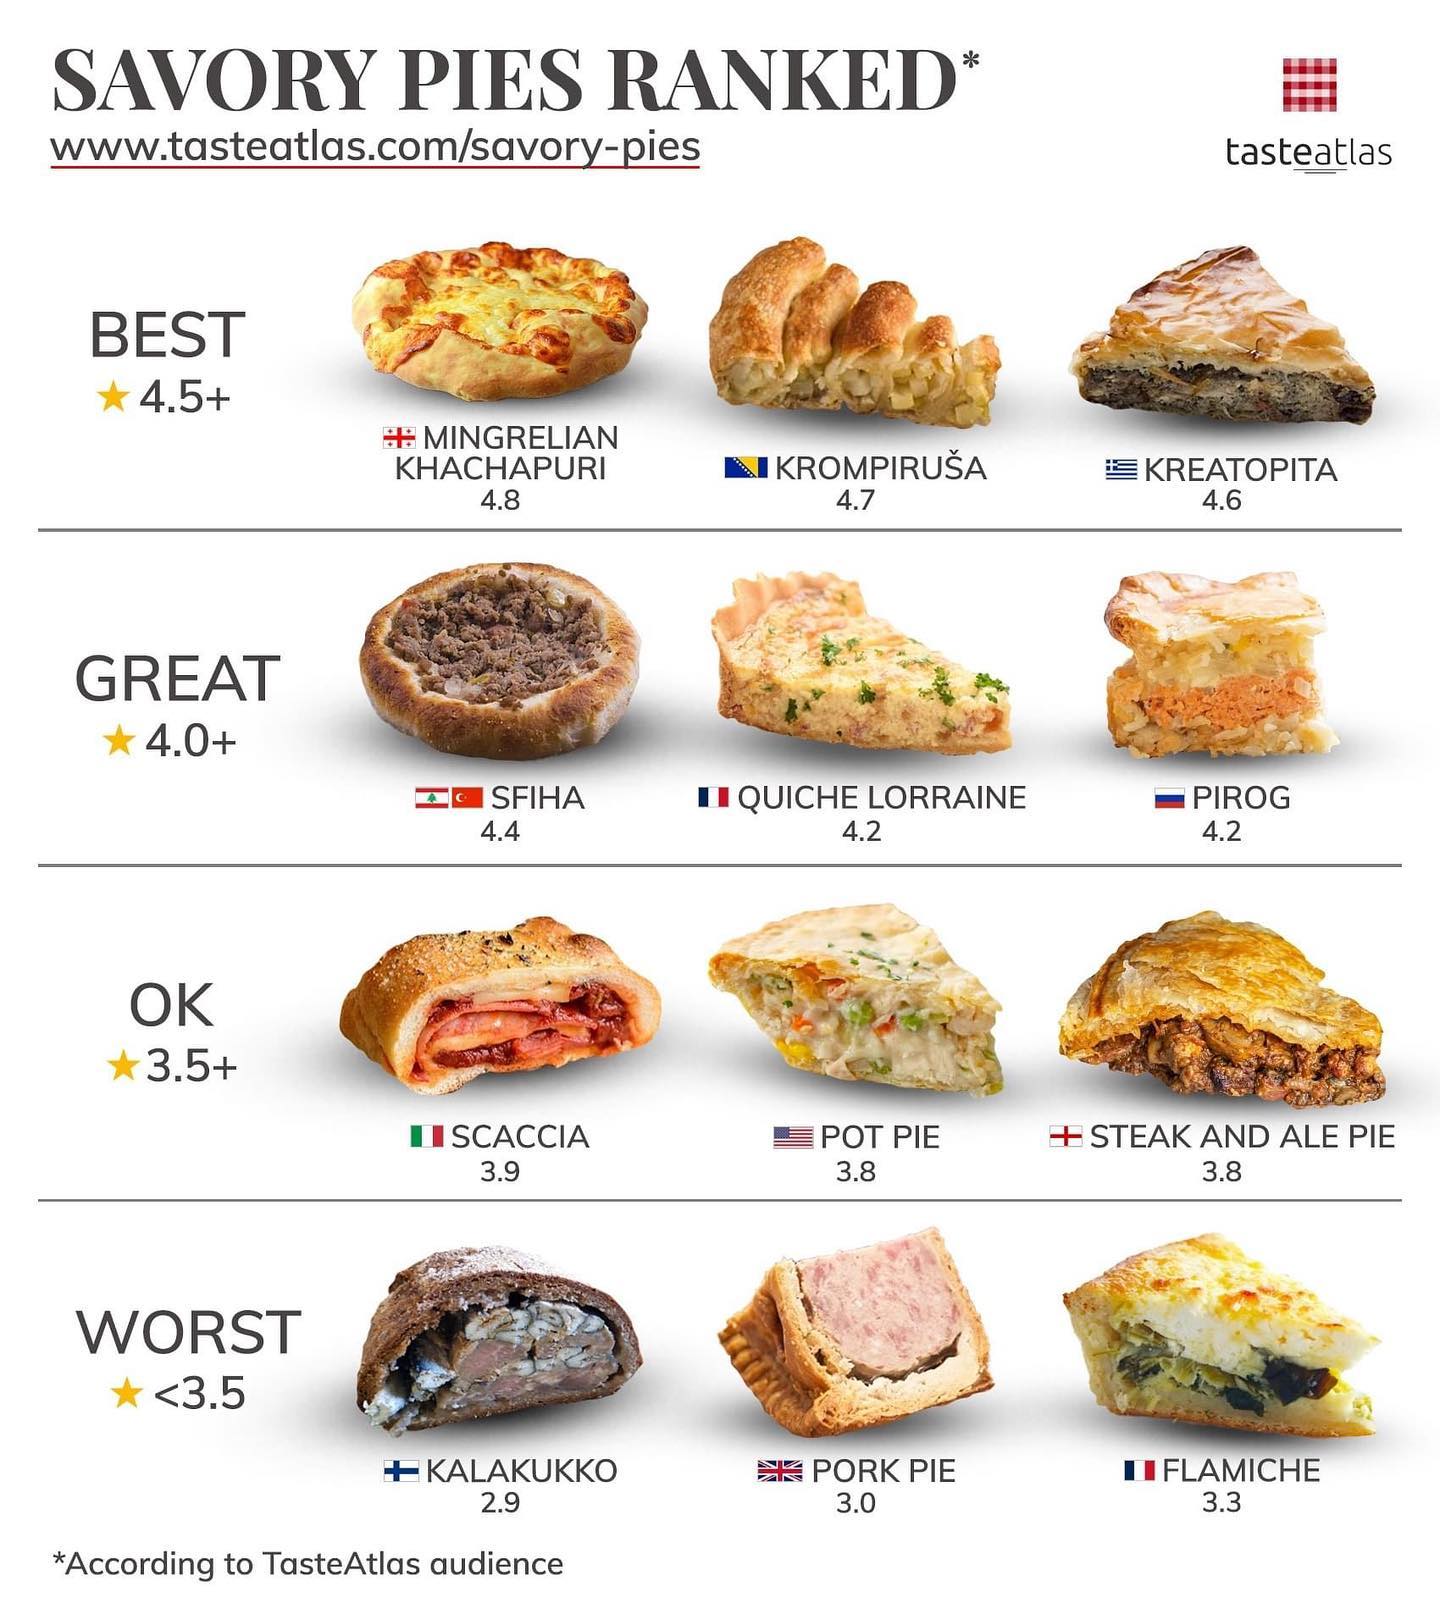 According to Taste Atlas, Krompirusa is one of the best ranked savory pies in the world!